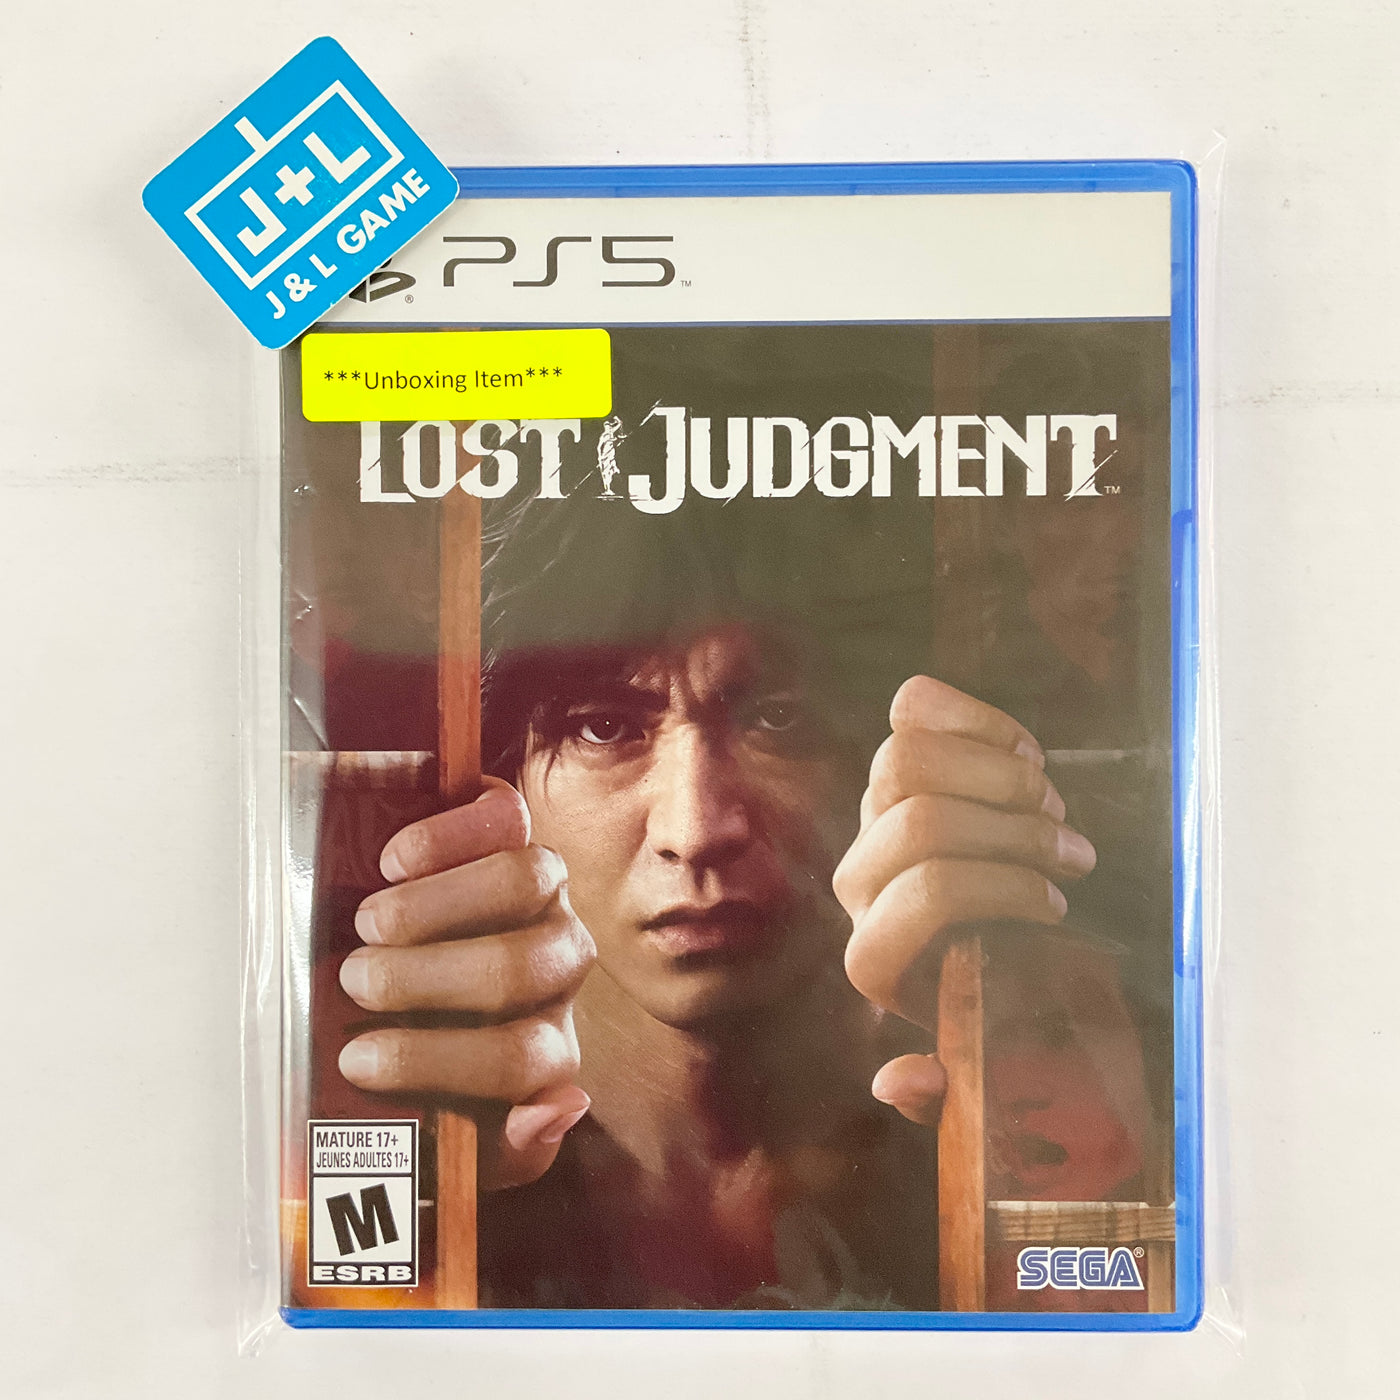 Judgment - (PS5) PlayStation 5 [UNBOXING]